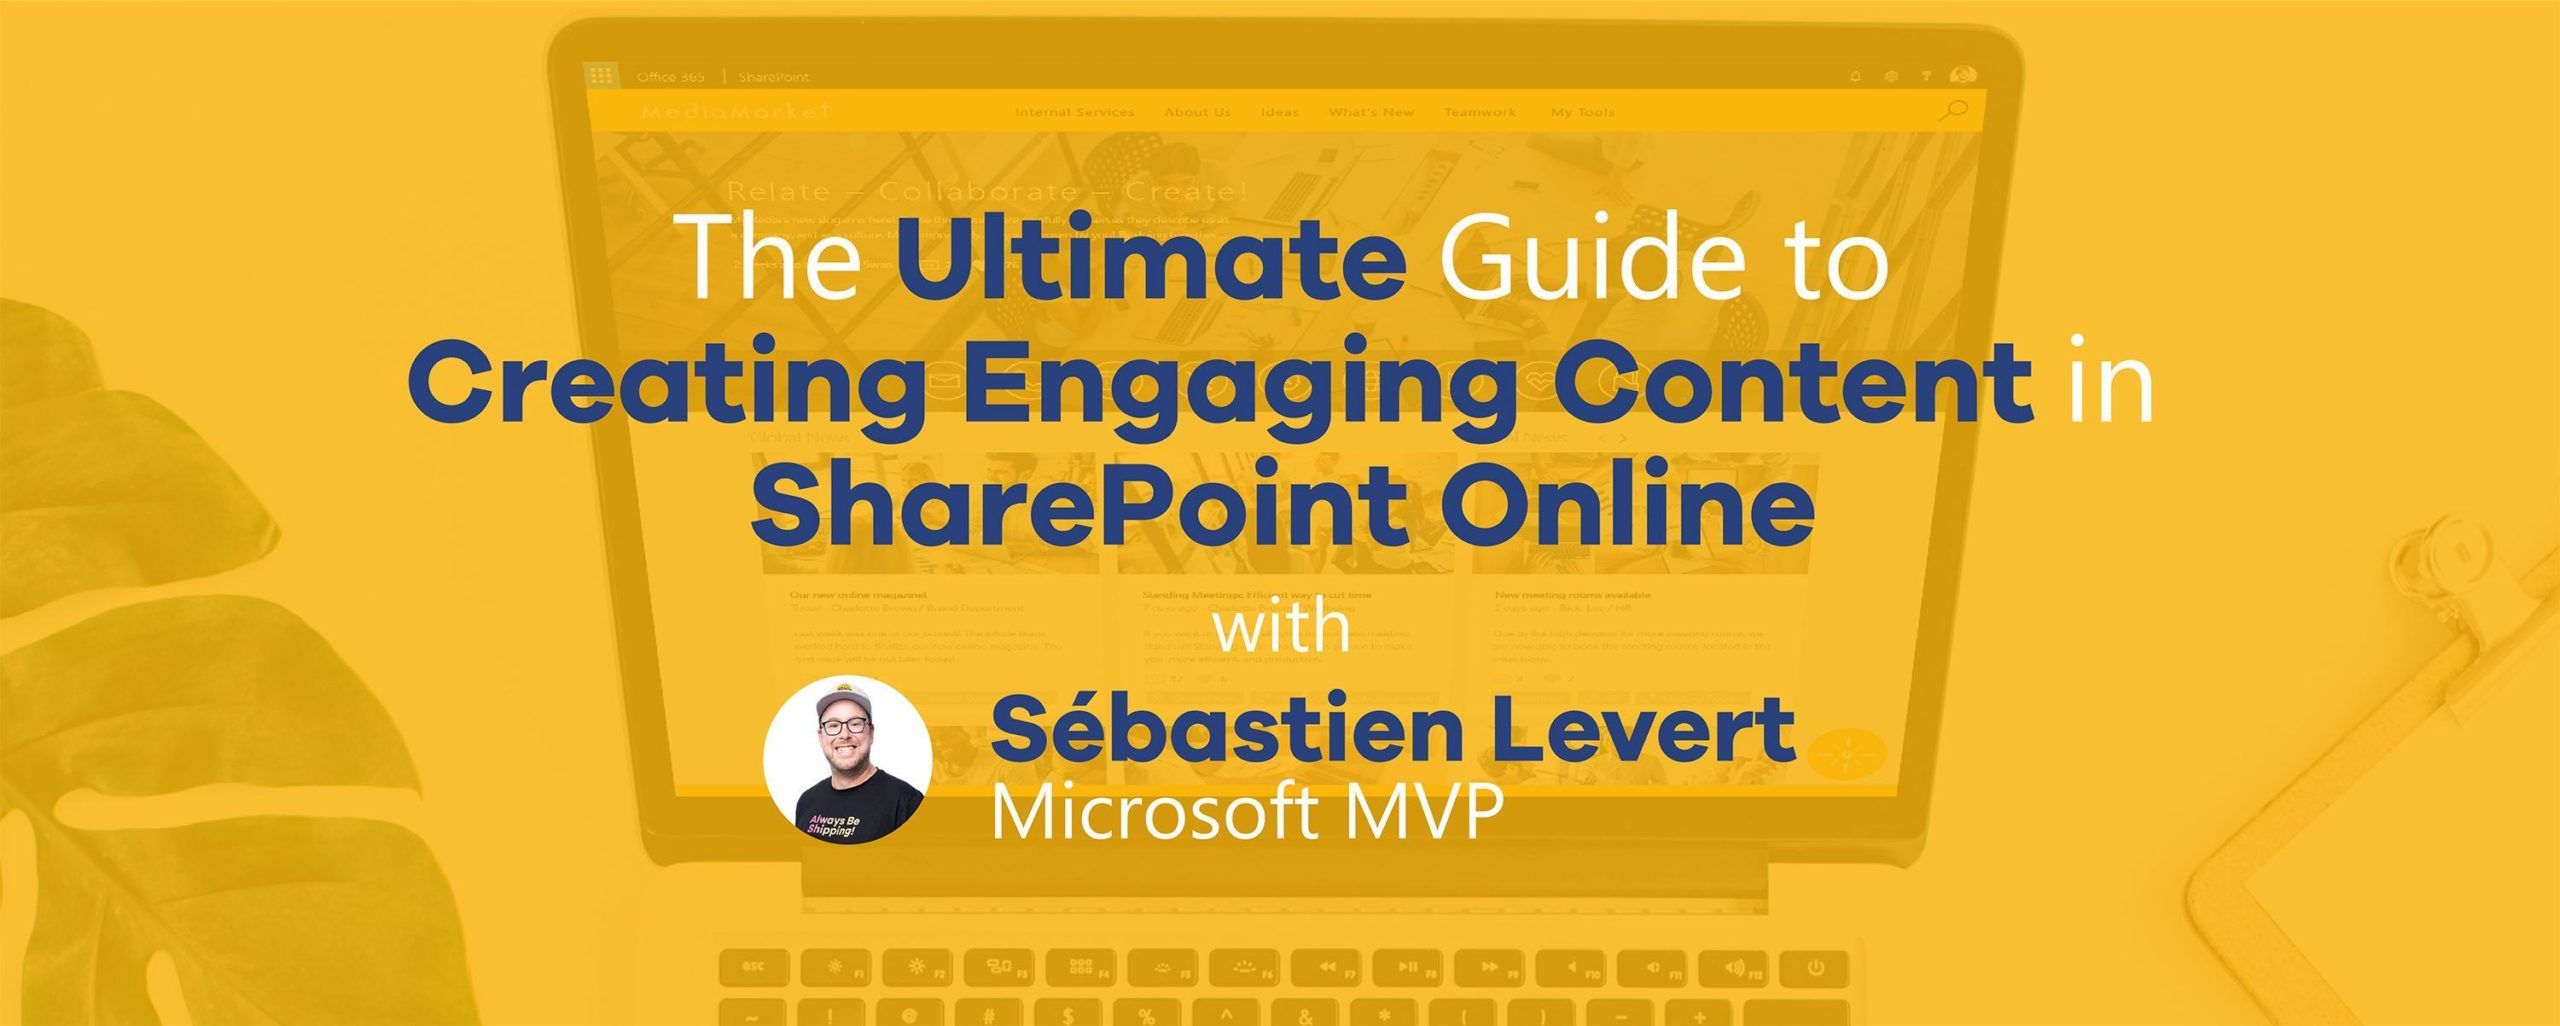 Ultimate Intranet Guide - SharePoint Online